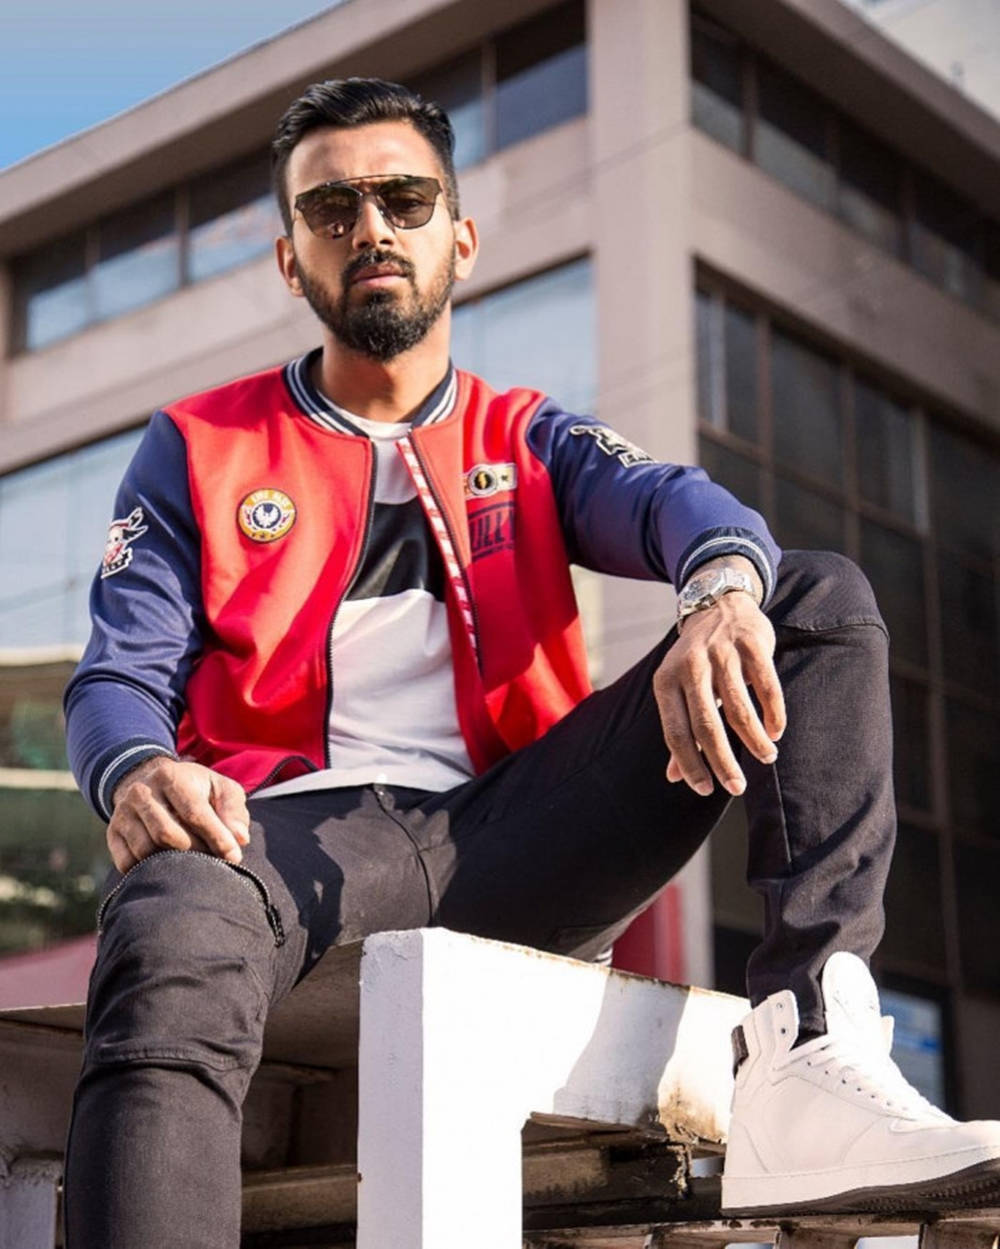 Kl Rahul Modelling From His Instagram